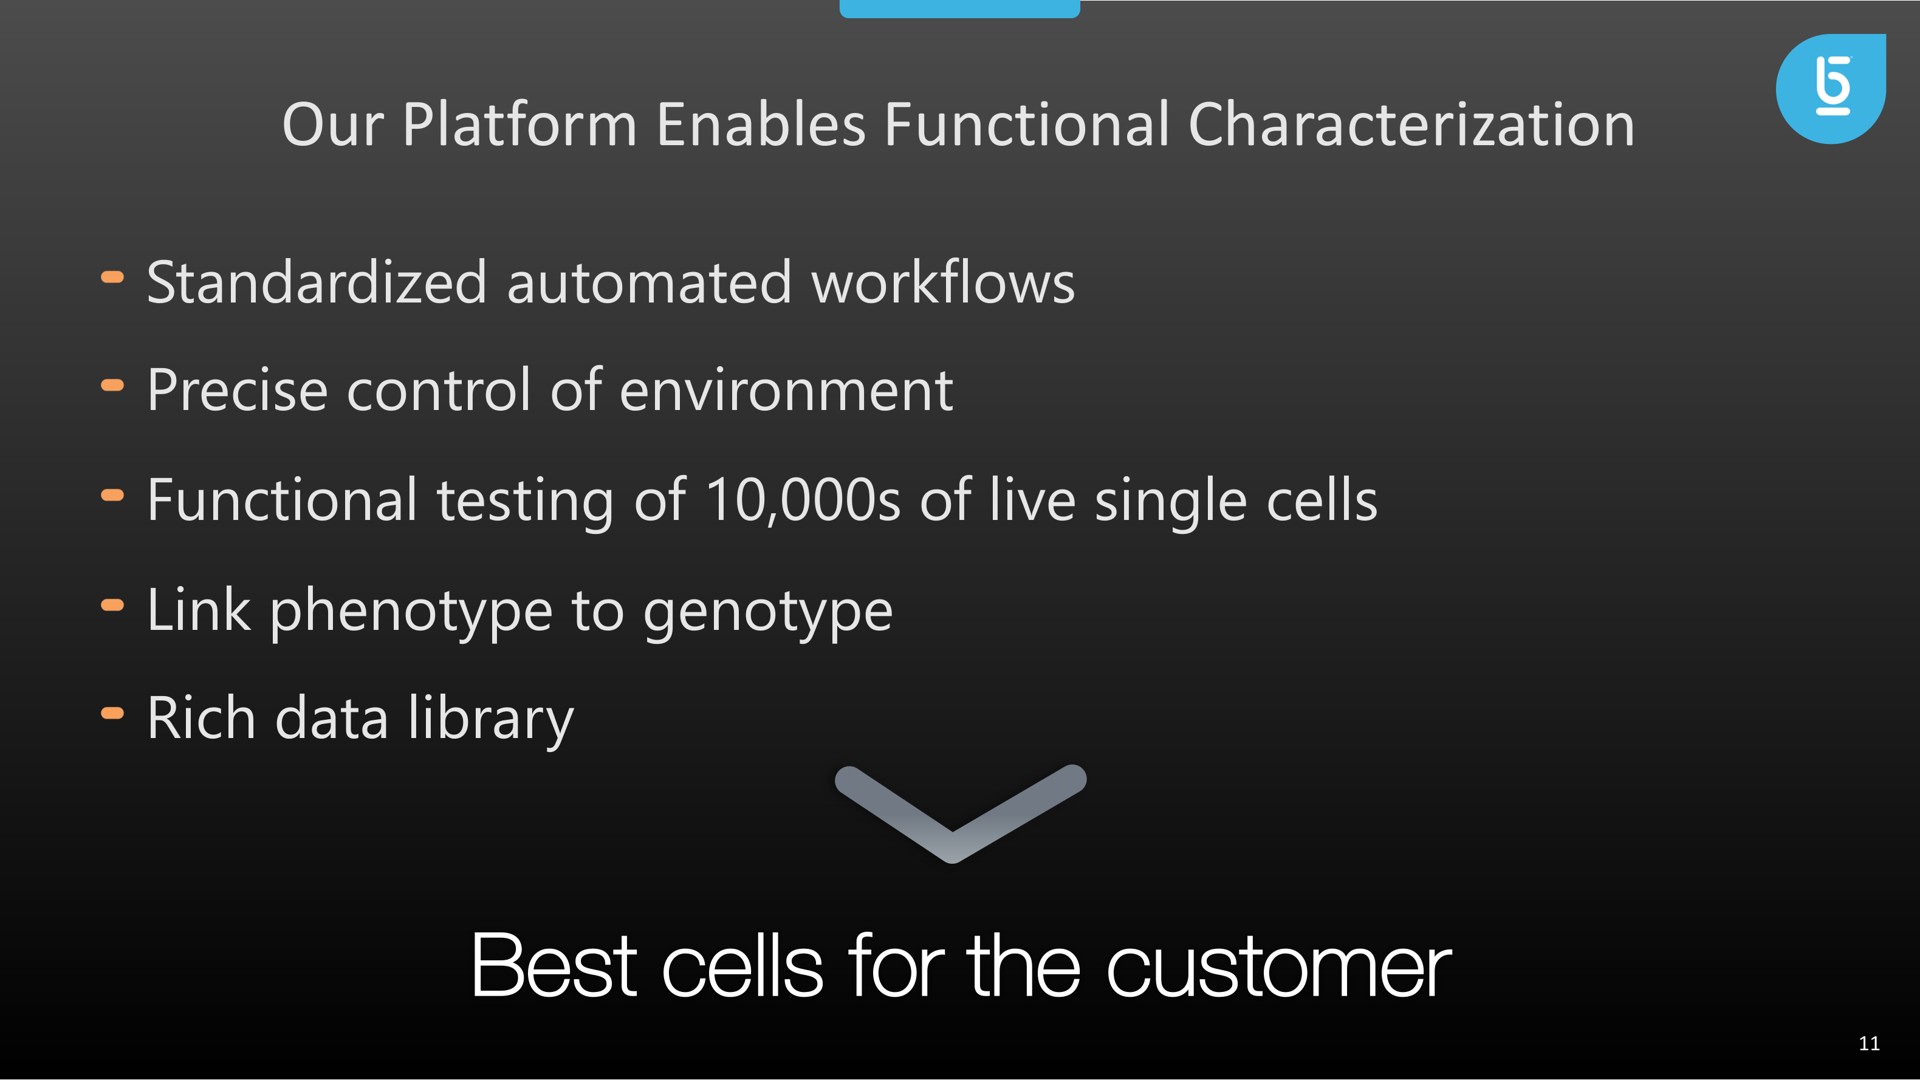 our platform enables functional characterization best cells for the customer standardized precise control of environment testing of of live single link phenotype to genotype rich data library | Berkeley Lights